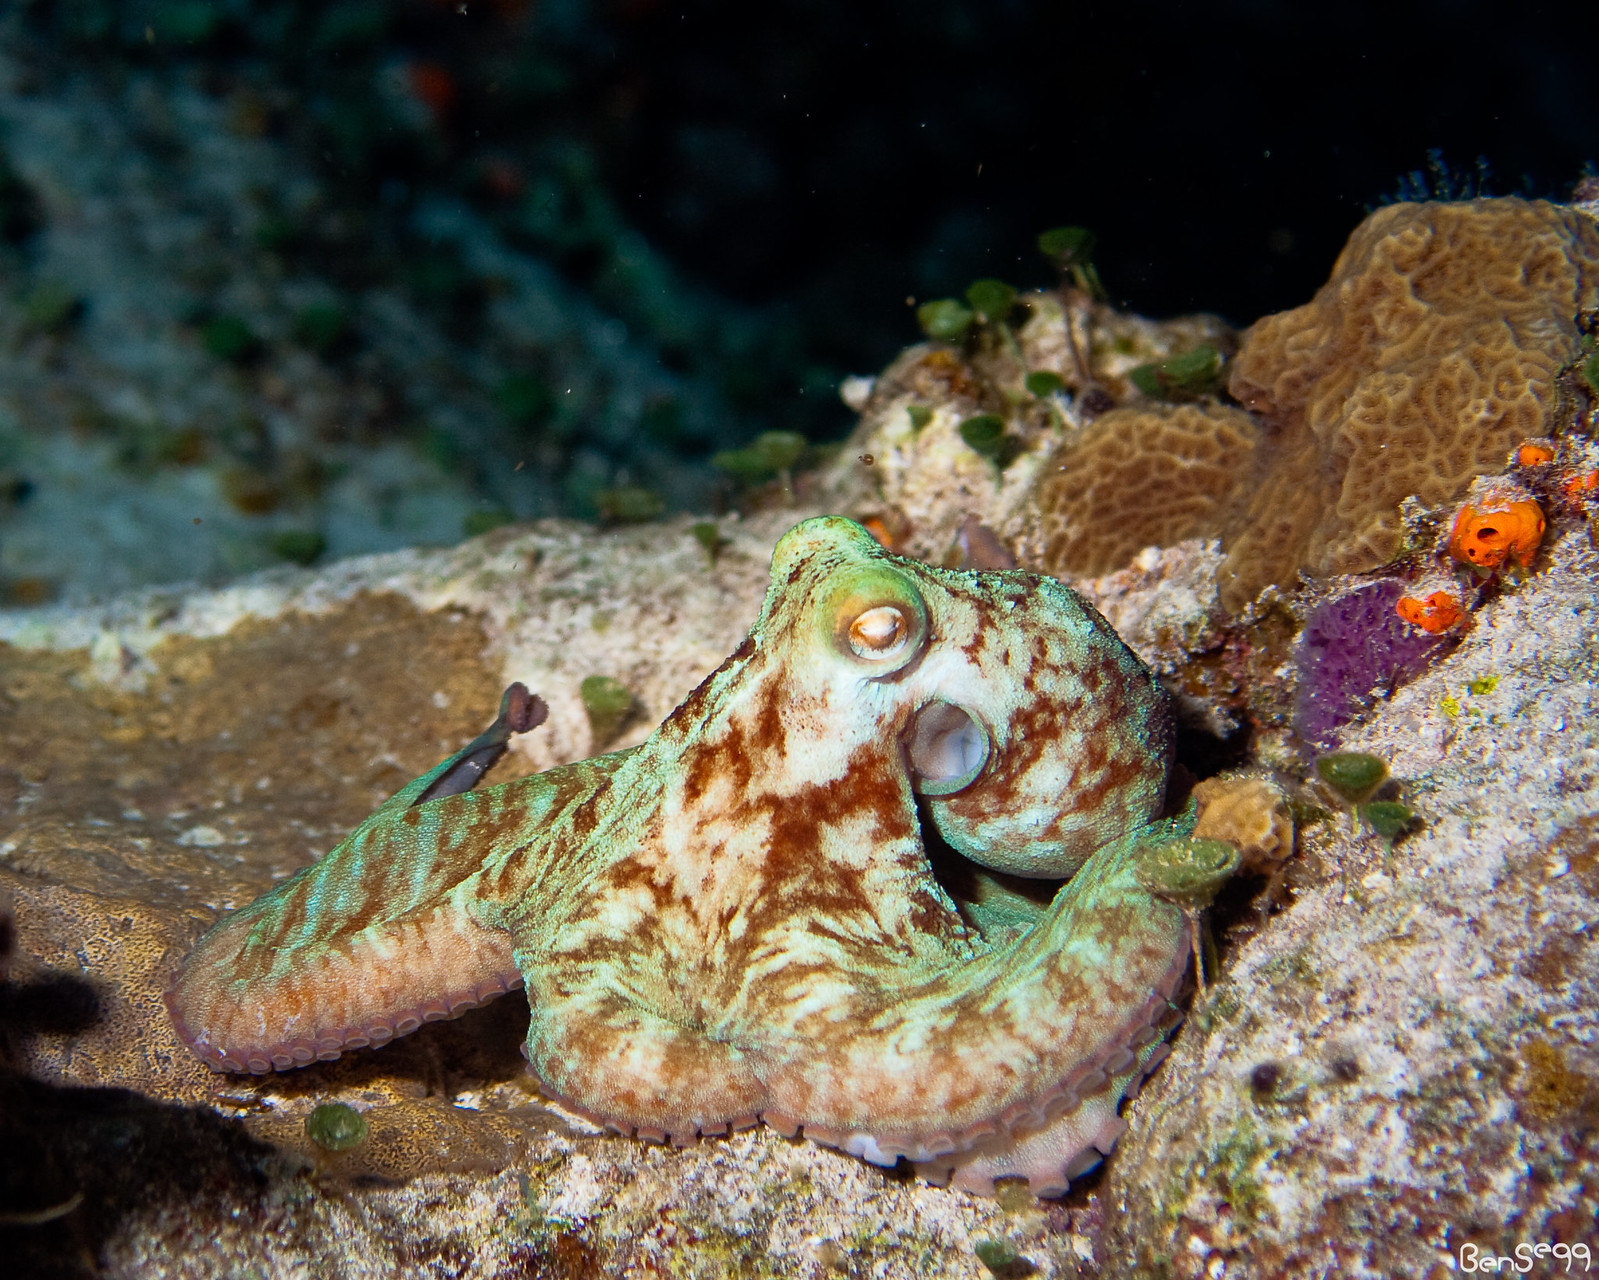 Caribbean reef octopus camouflaged. PC: ScubaBen